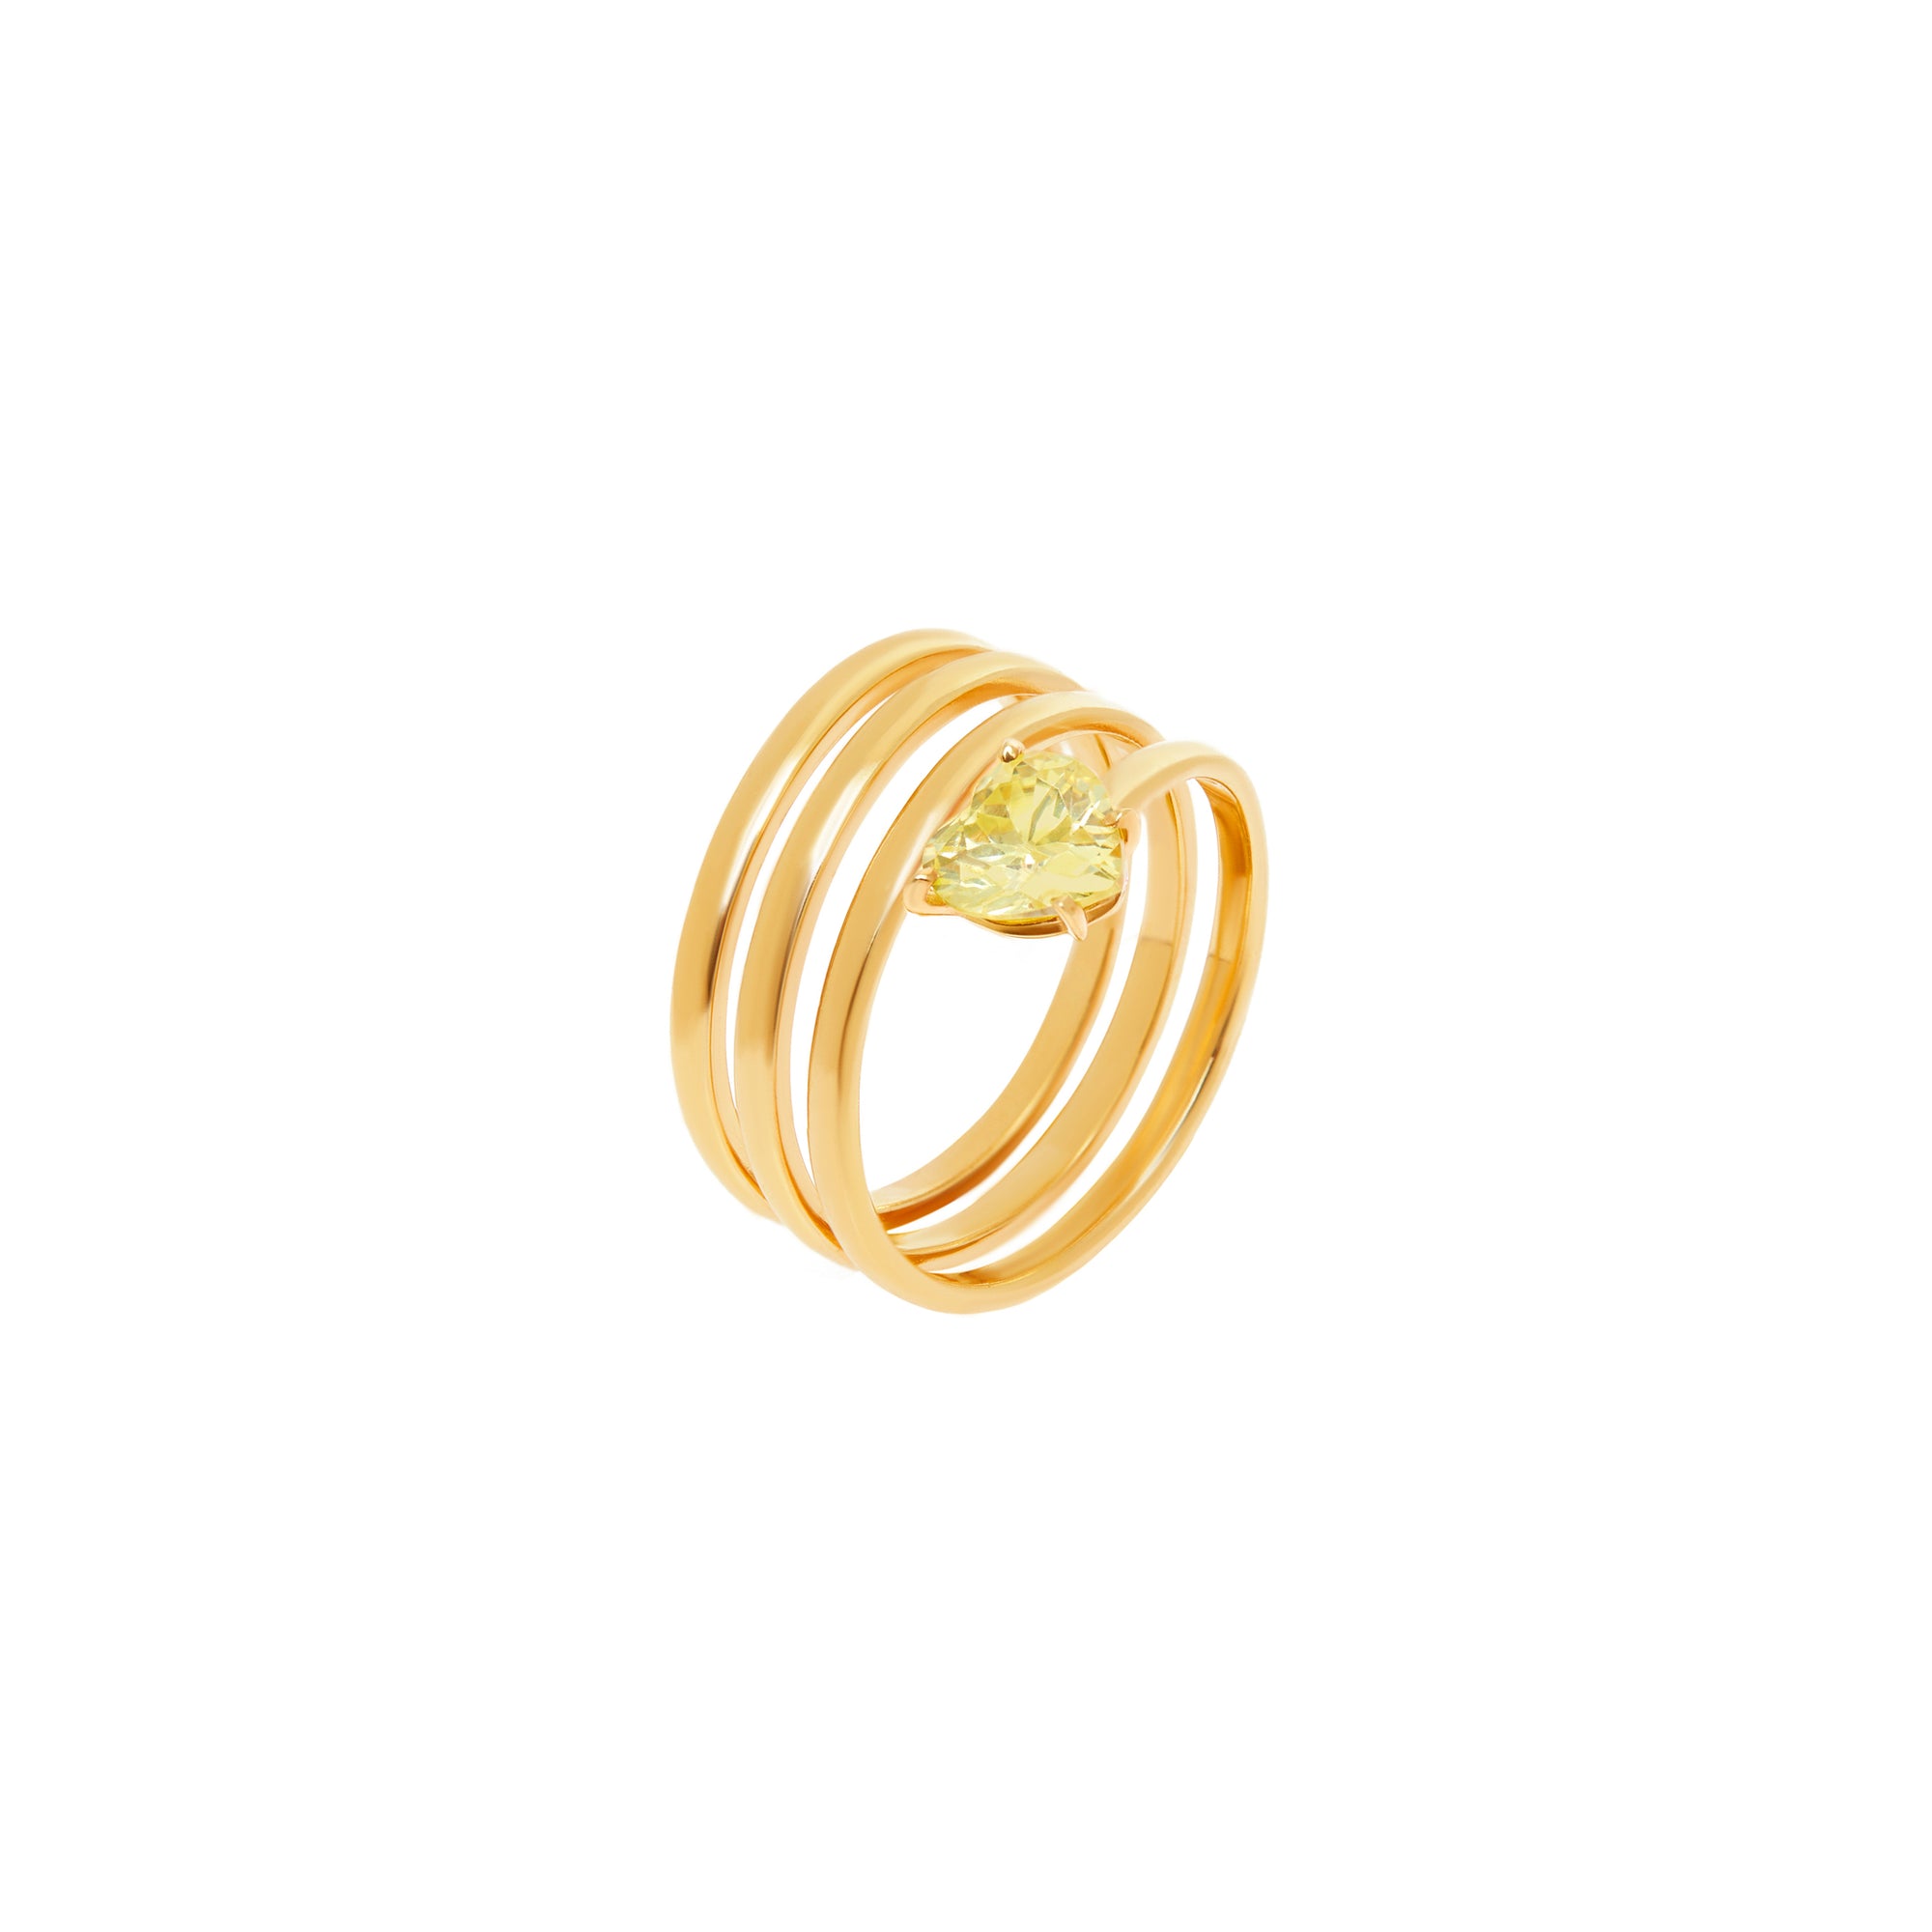 Ring 'Entwined Heart' – Yellow